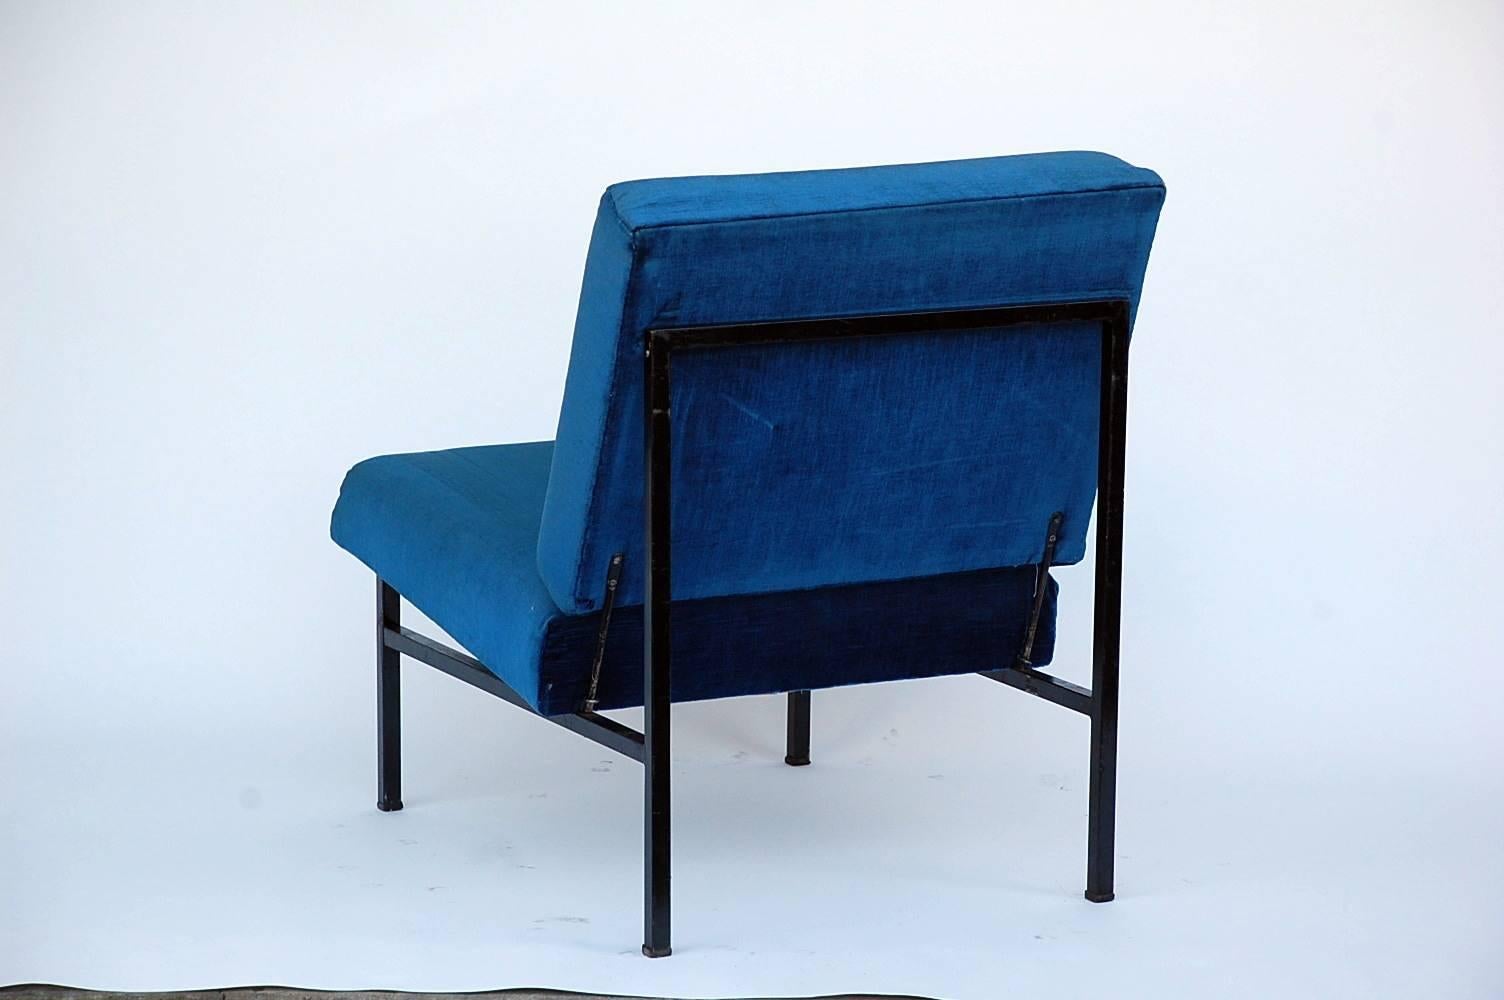 Pair of 'Déclive' Velvet and Blackened Steel Slipper Chairs by Design Frères In Excellent Condition For Sale In Los Angeles, CA